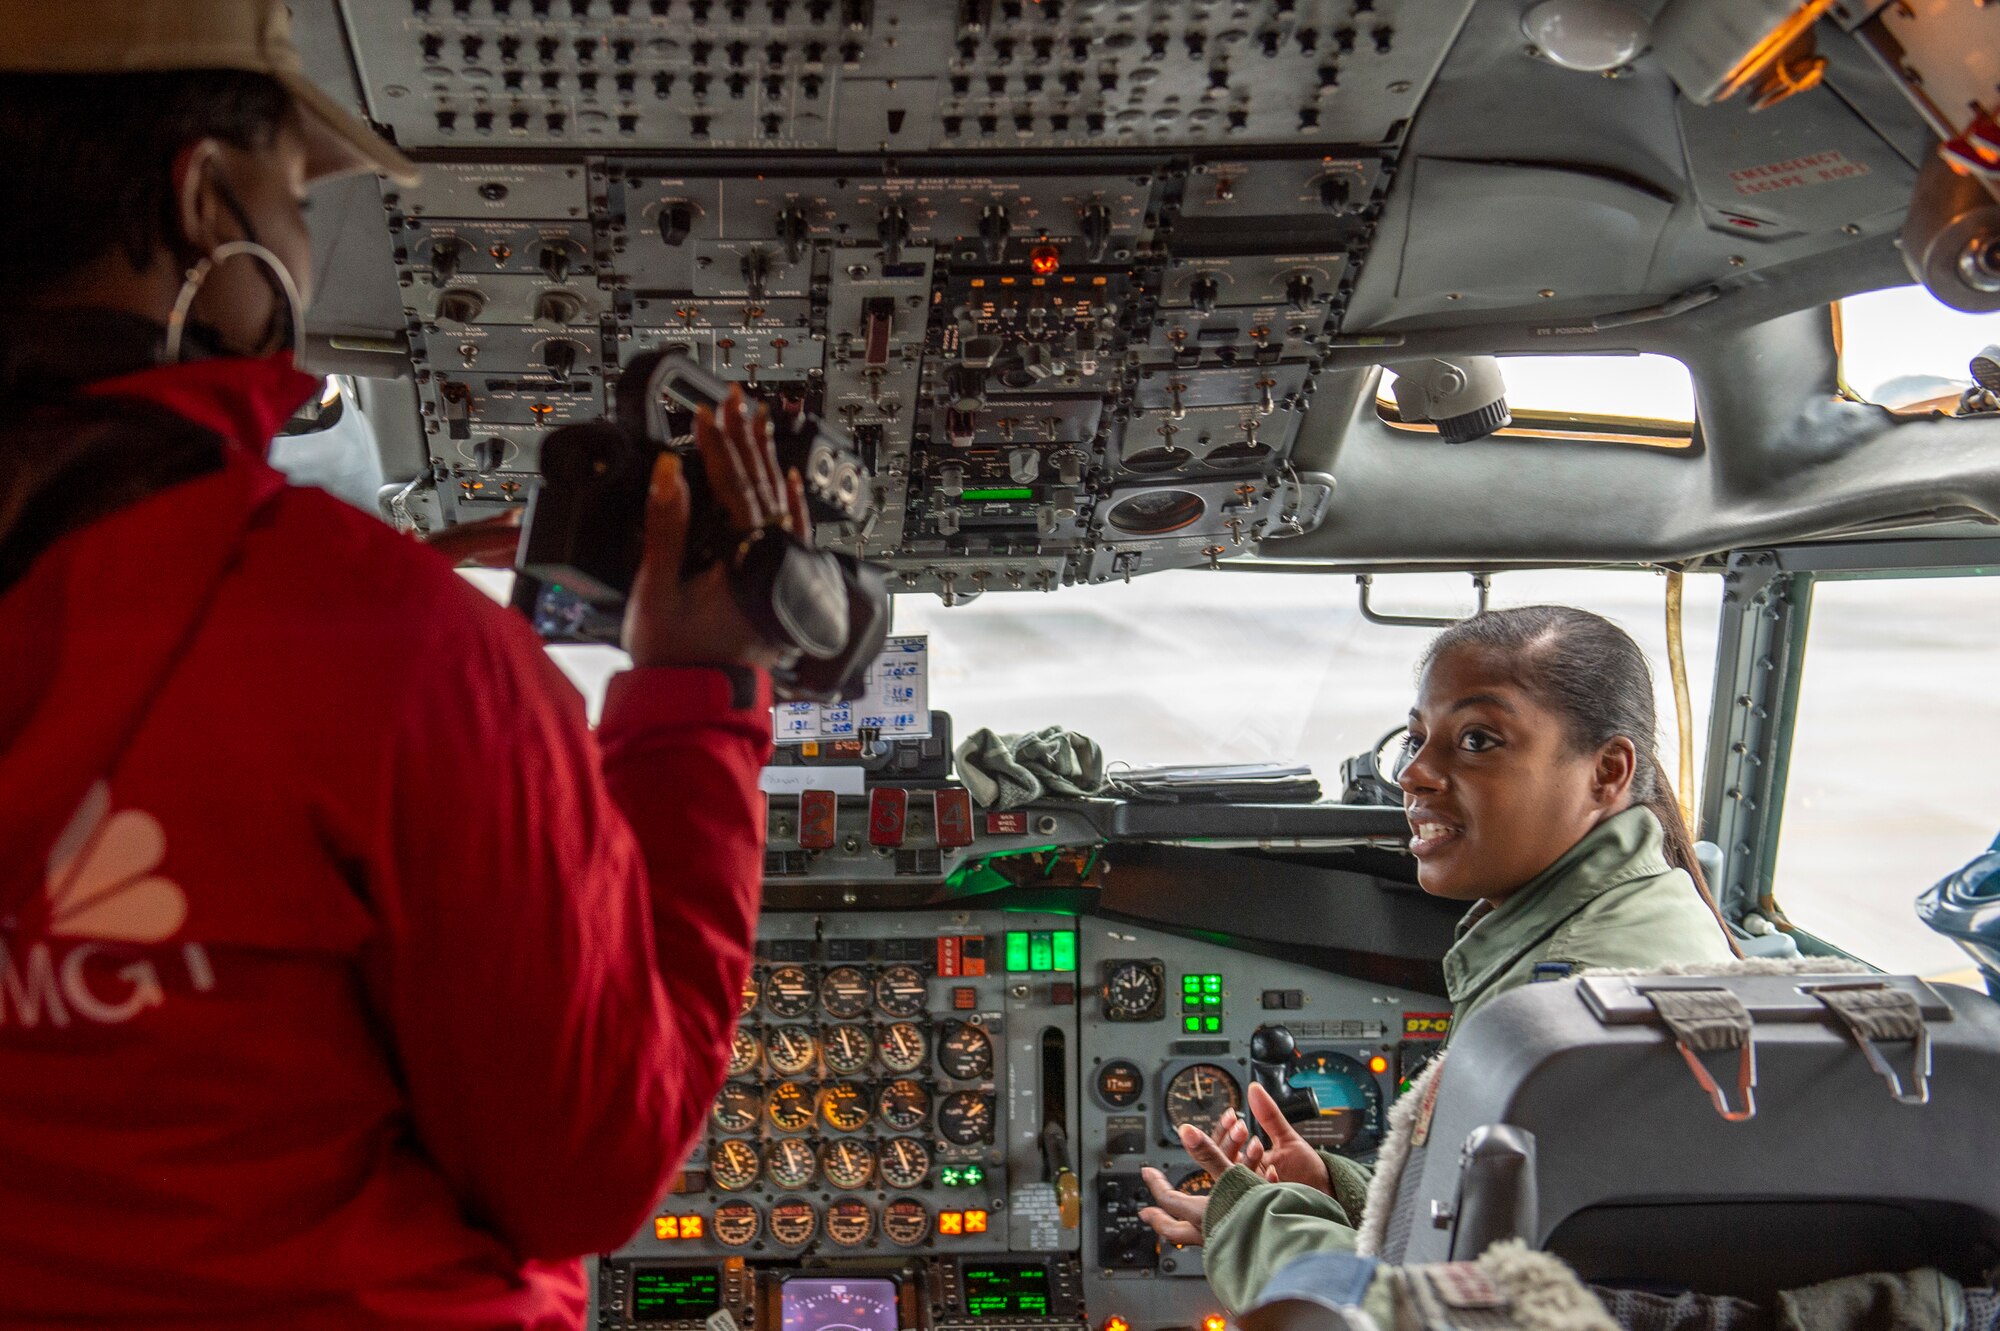 Photo shows woman sitting in cockpit of aircraft being interviewed on camera.